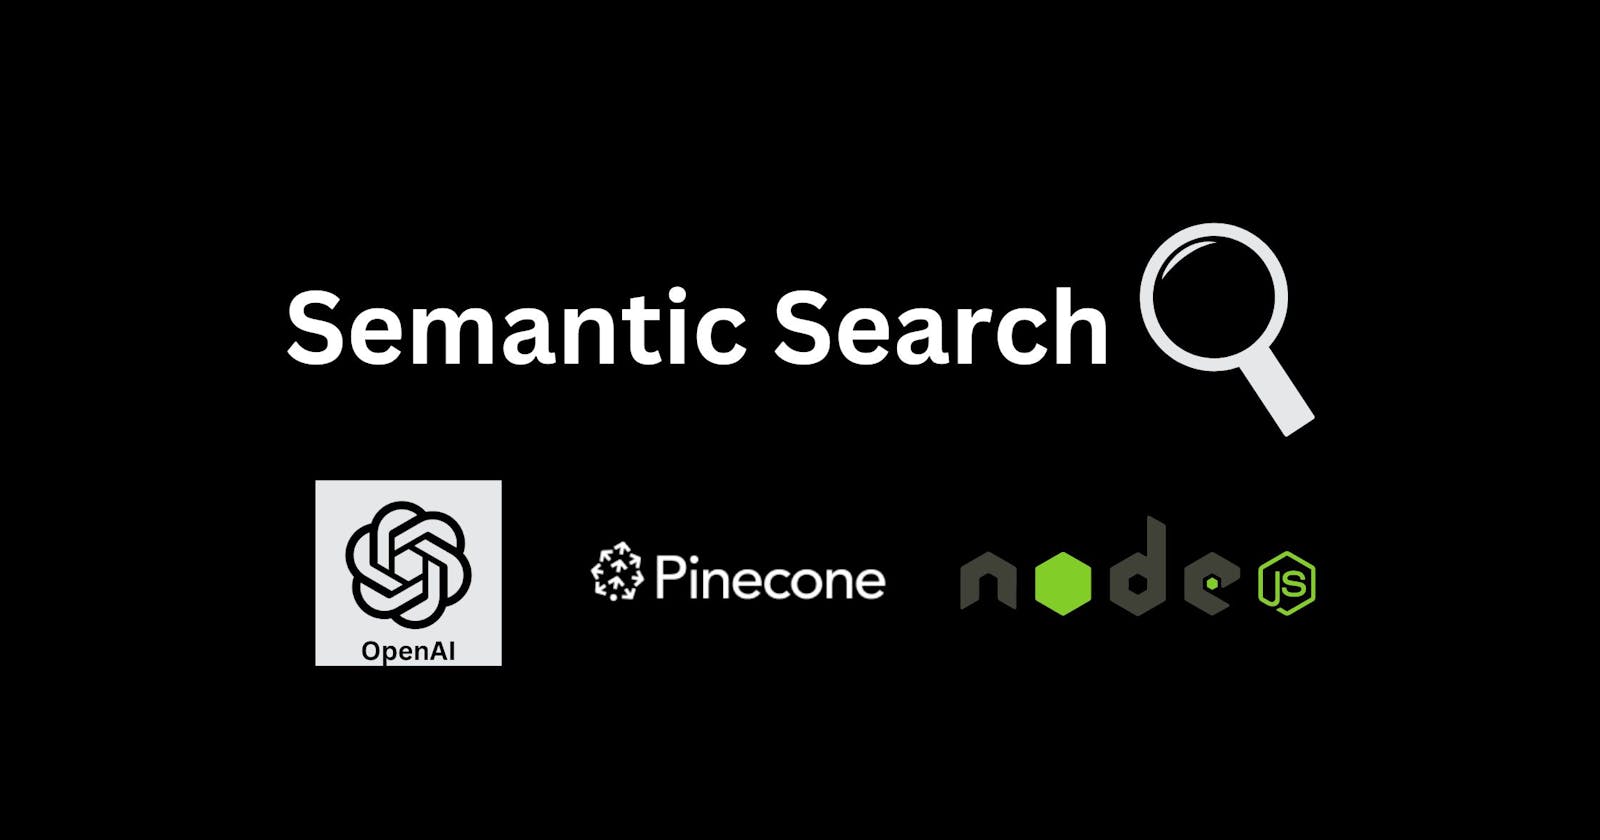 Semantic search using Open AI Embedding, Pinecone Vector DB, and Node JS